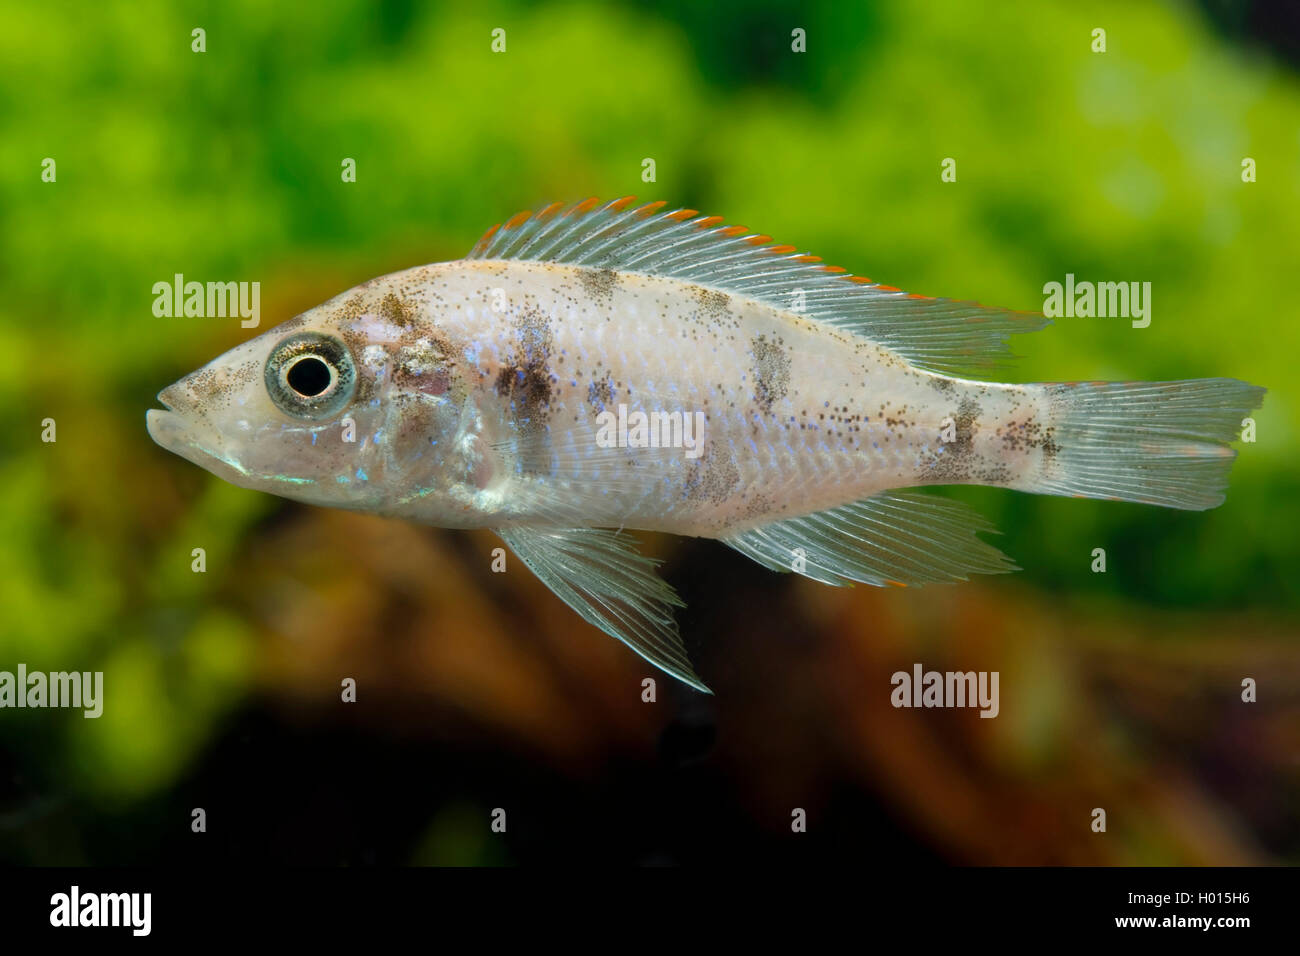 Knife Malawi-Cyrtocara (Dimidiochromis compressiceps Five Color), Five Color Stock Photo